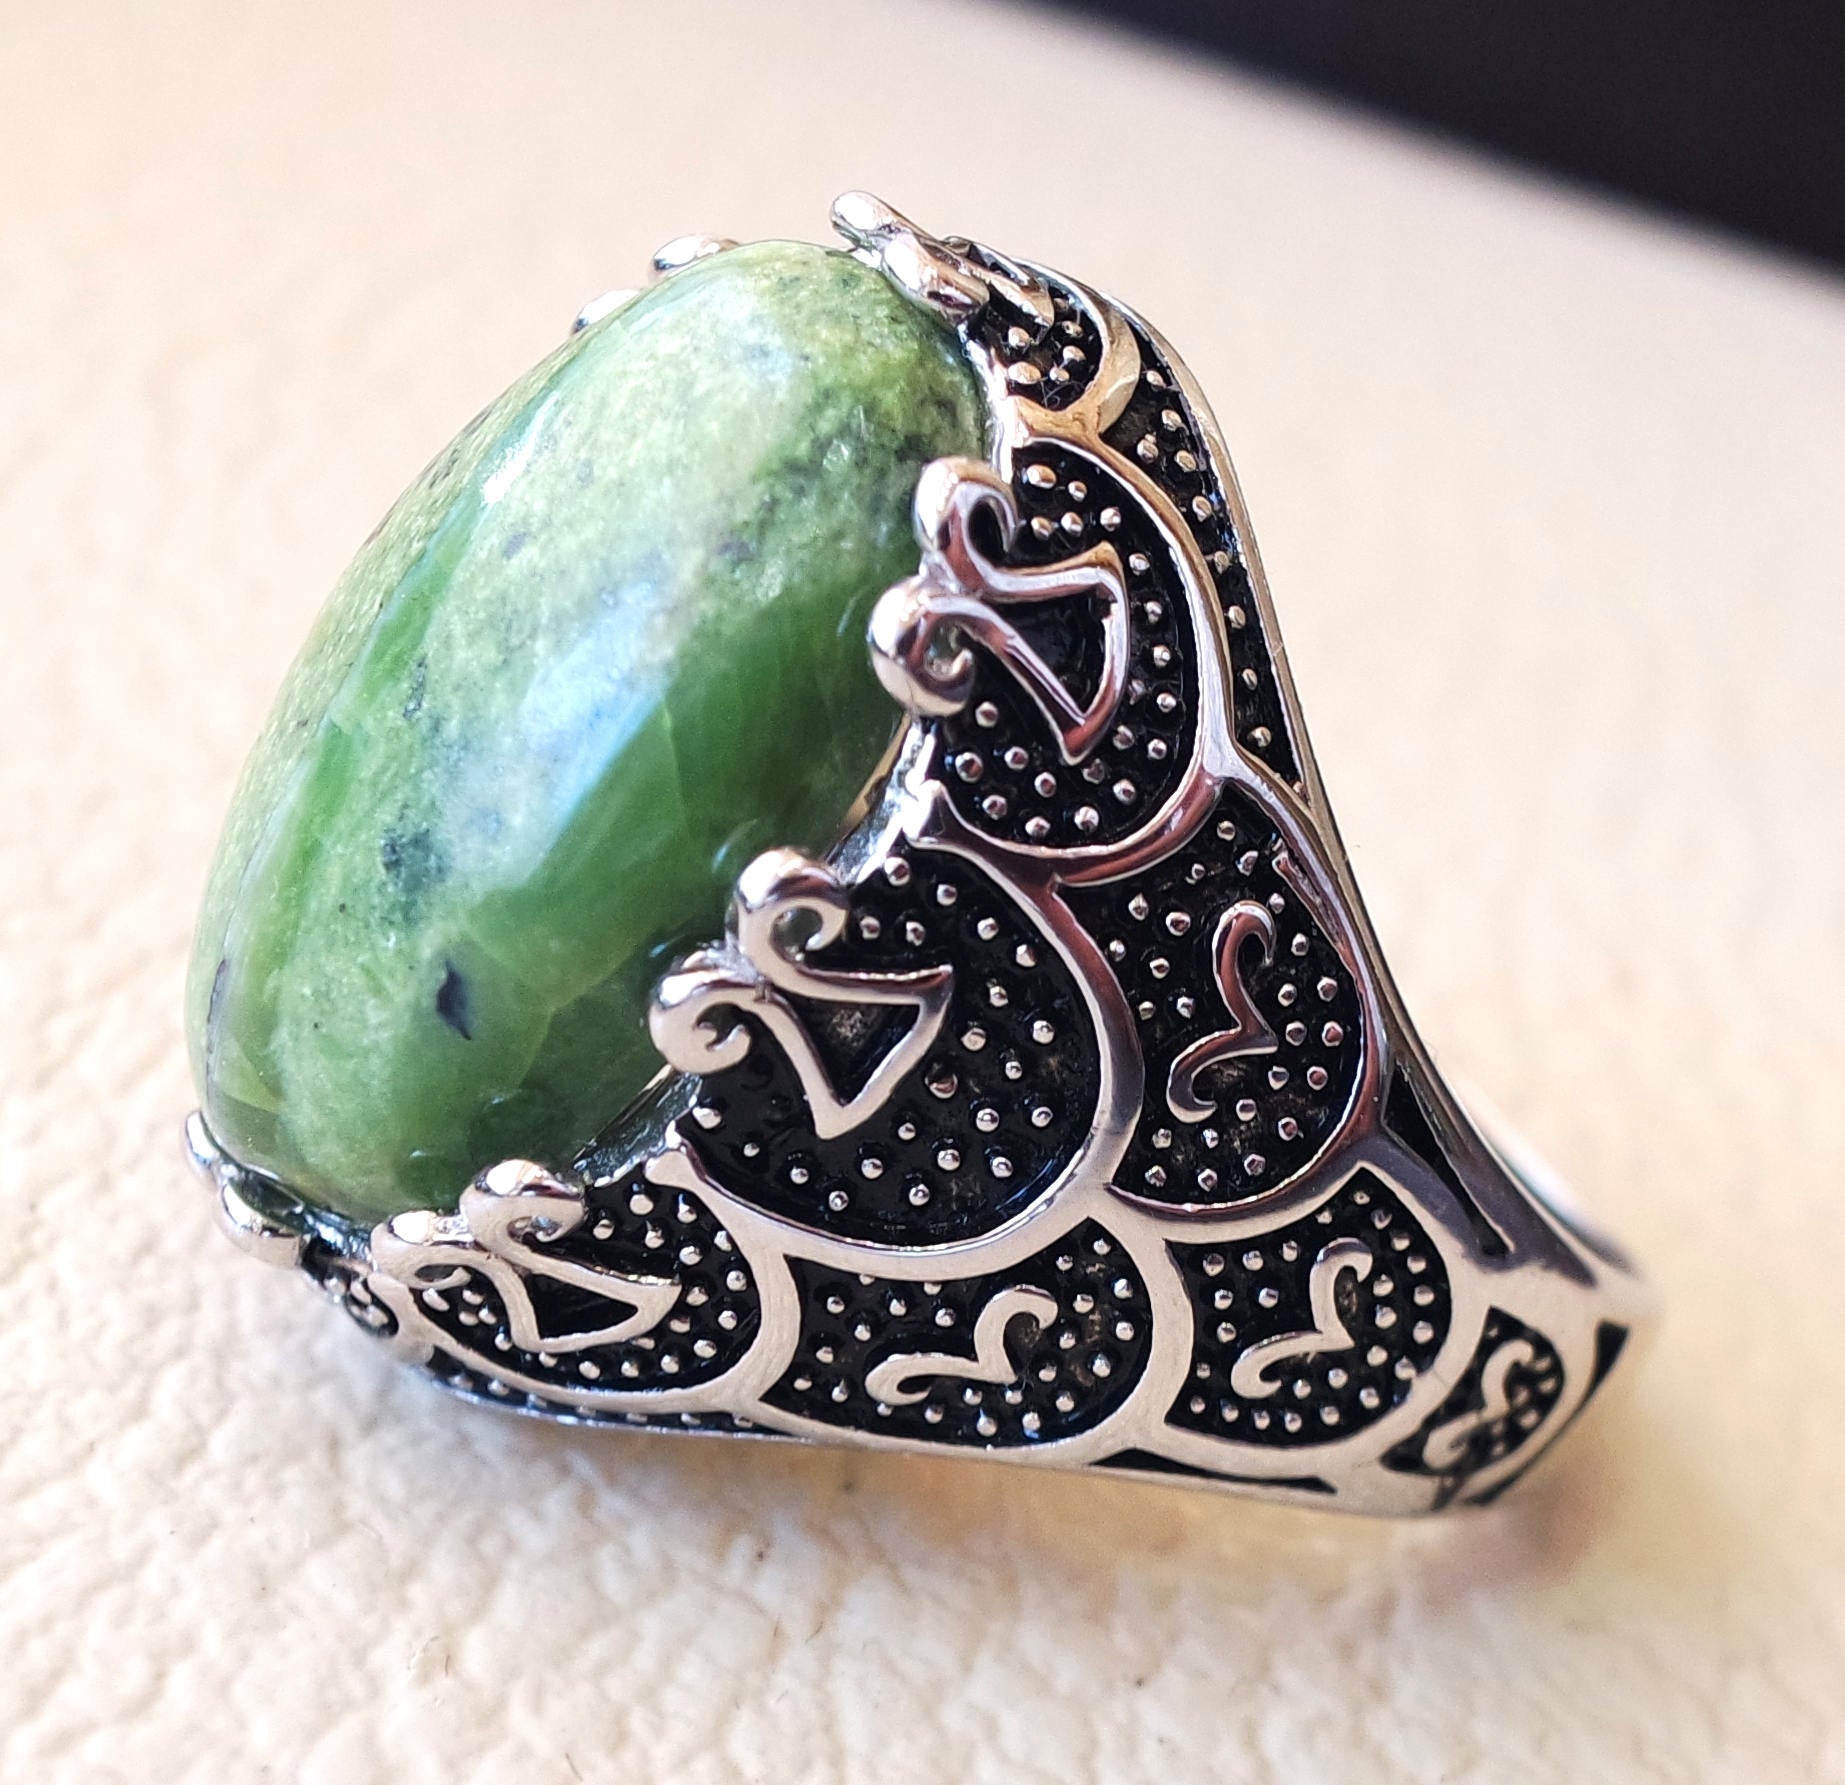 green swiss opal huge natural stone men ring sterling silver 925 stunning genuine oval gem ottoman style jewelry all sizes